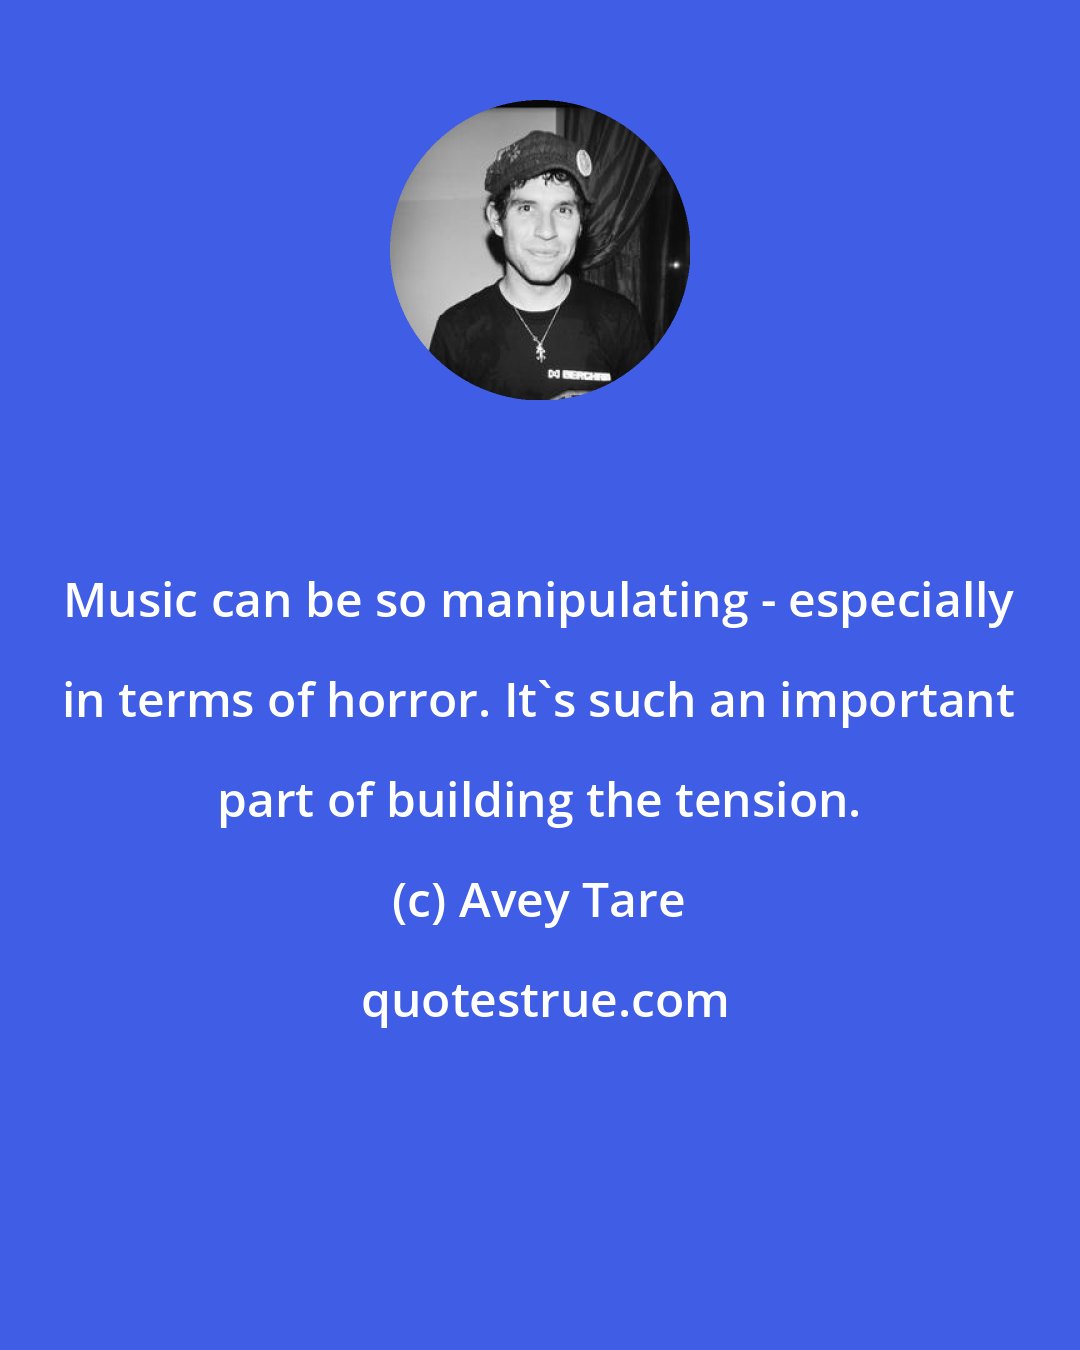 Avey Tare: Music can be so manipulating - especially in terms of horror. It's such an important part of building the tension.